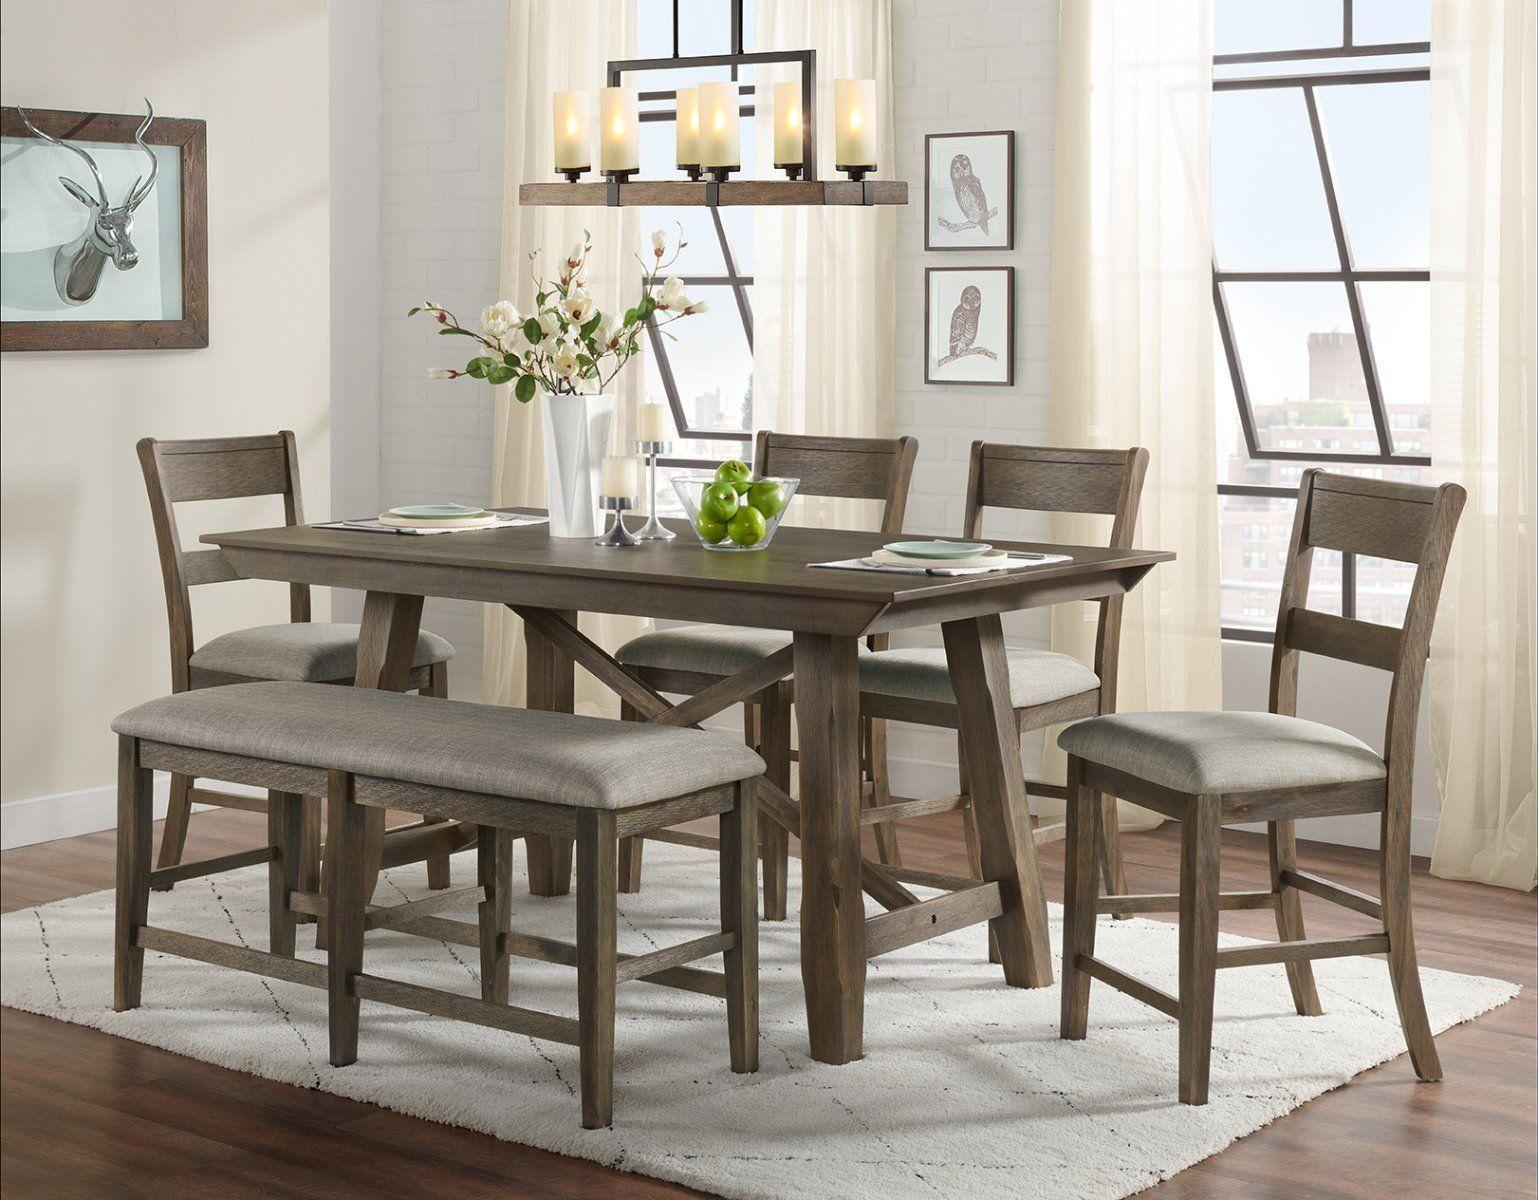 6PC dining set with Counter height table 4 stools and backless bench